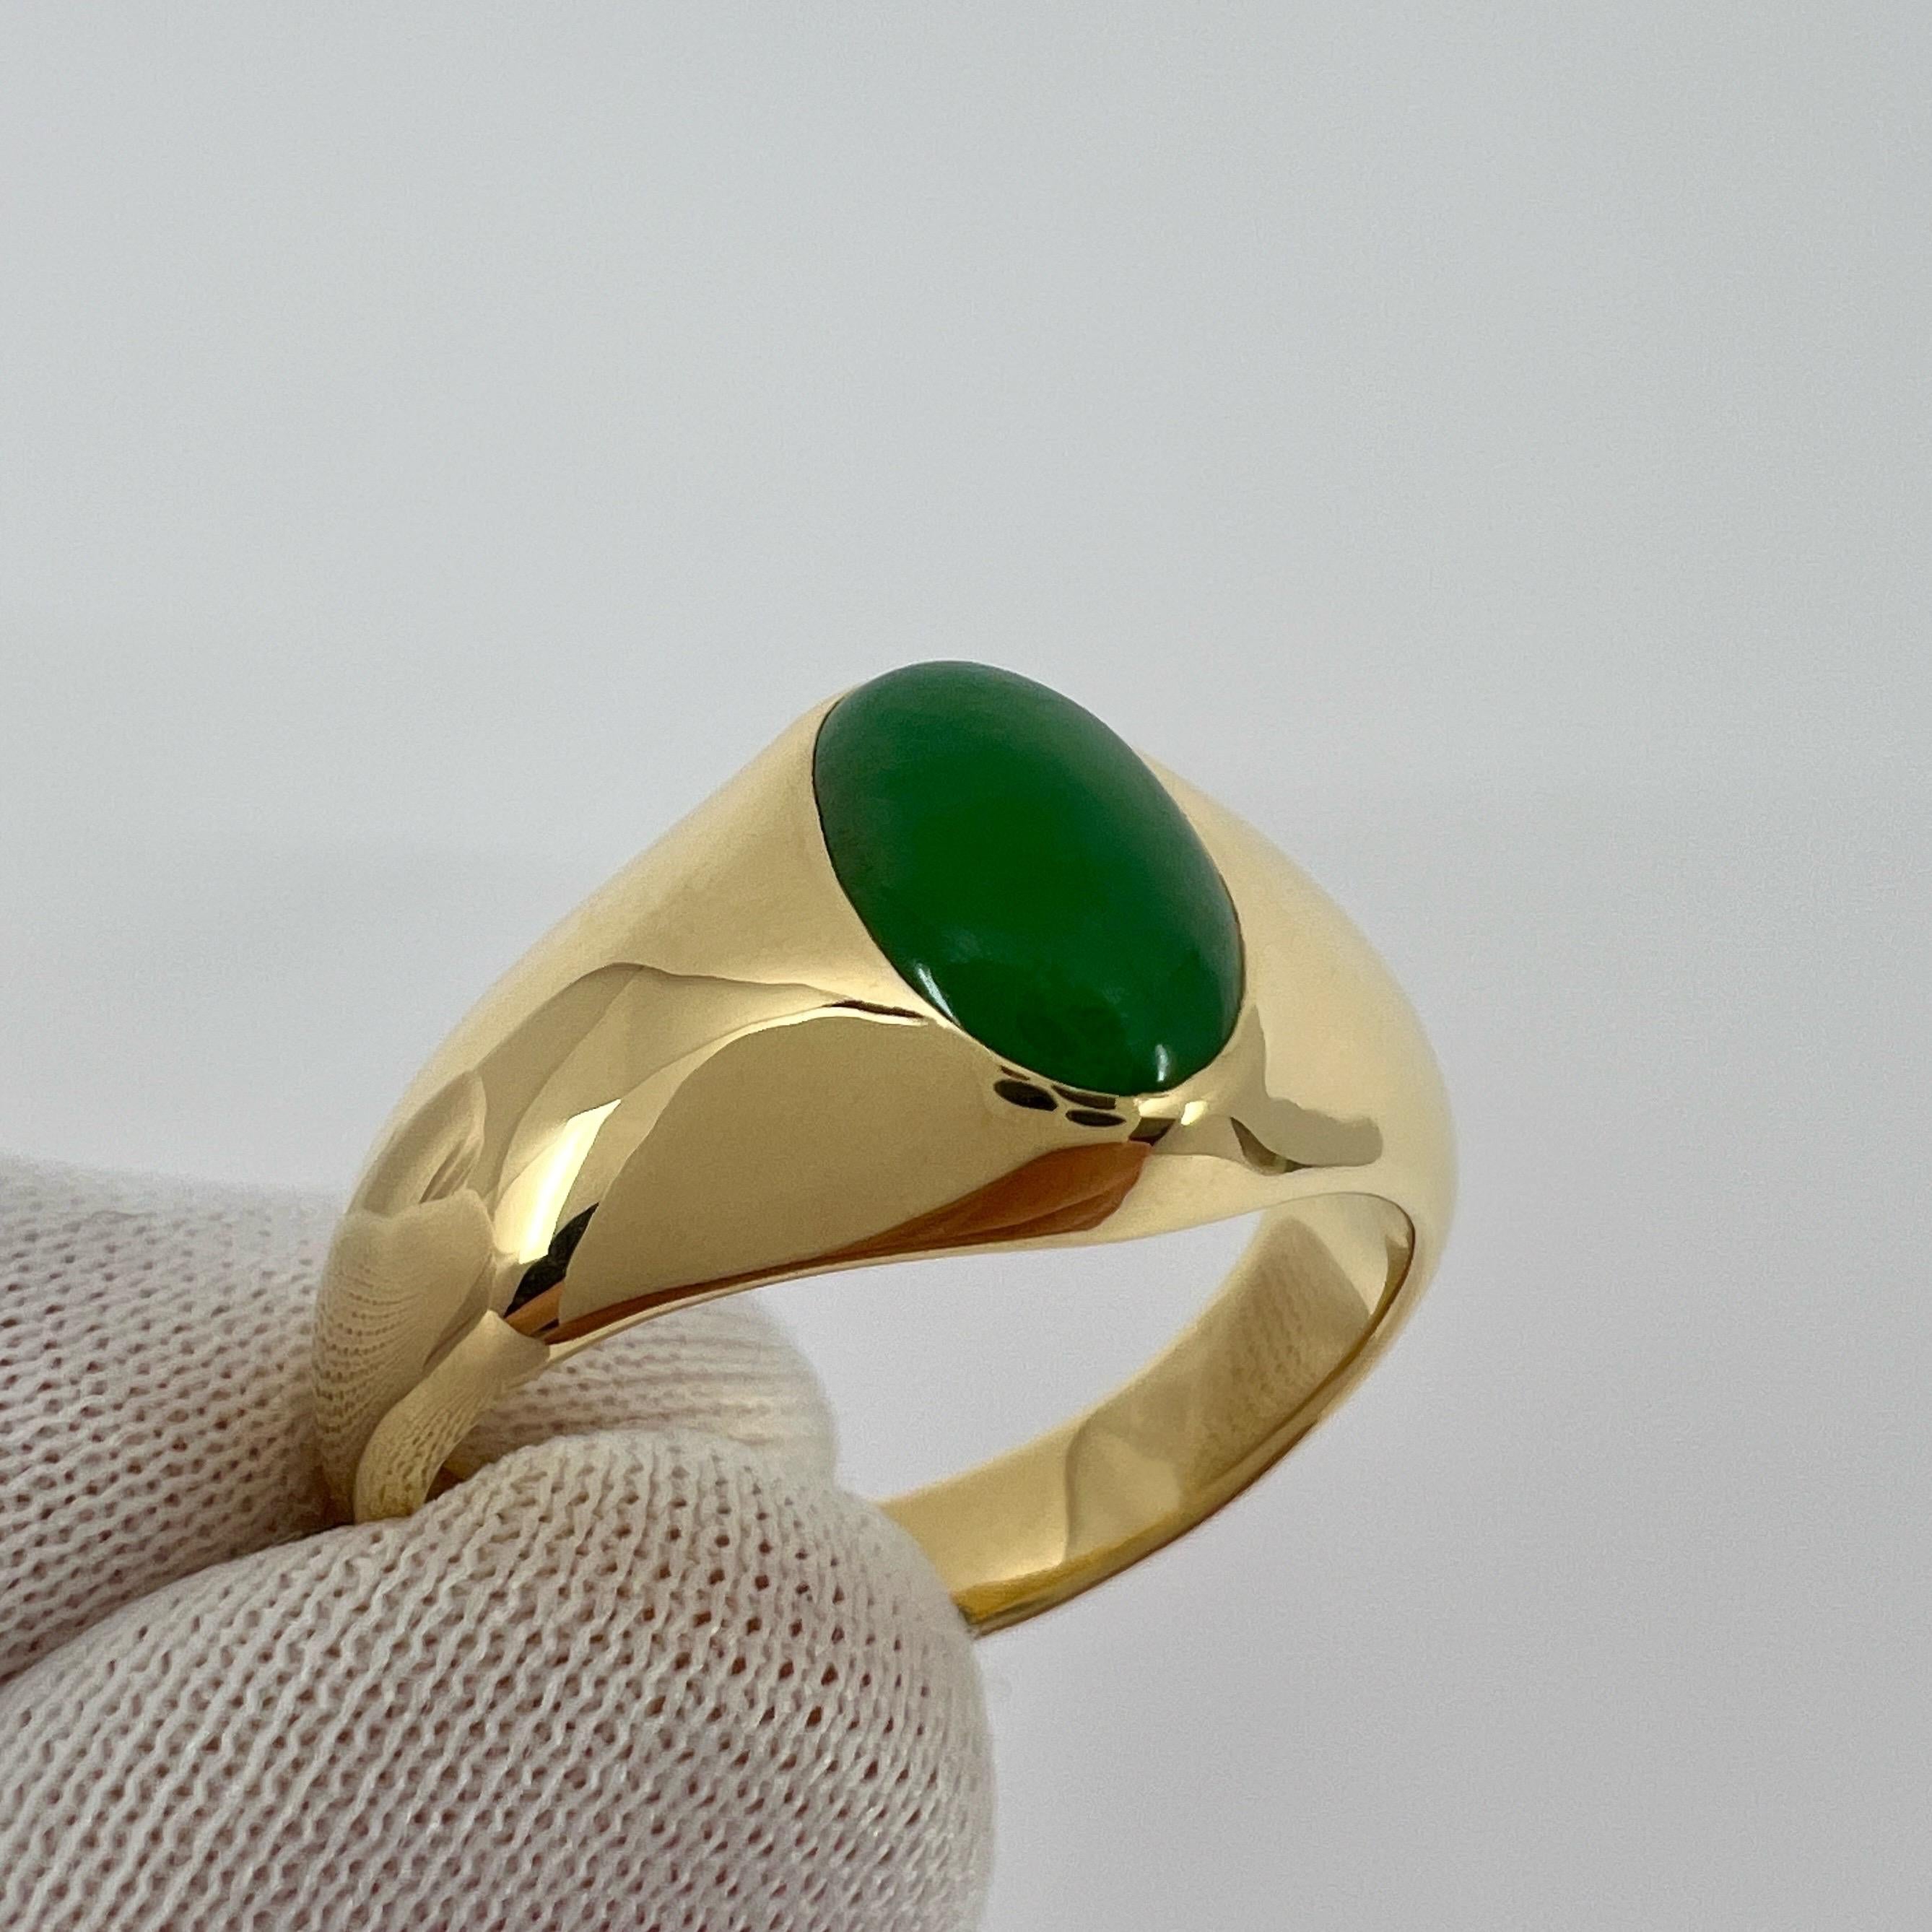 GIA Certified Jadeite A Grade Jade Oval Untreated 18k Yellow Gold Signet Ring 1